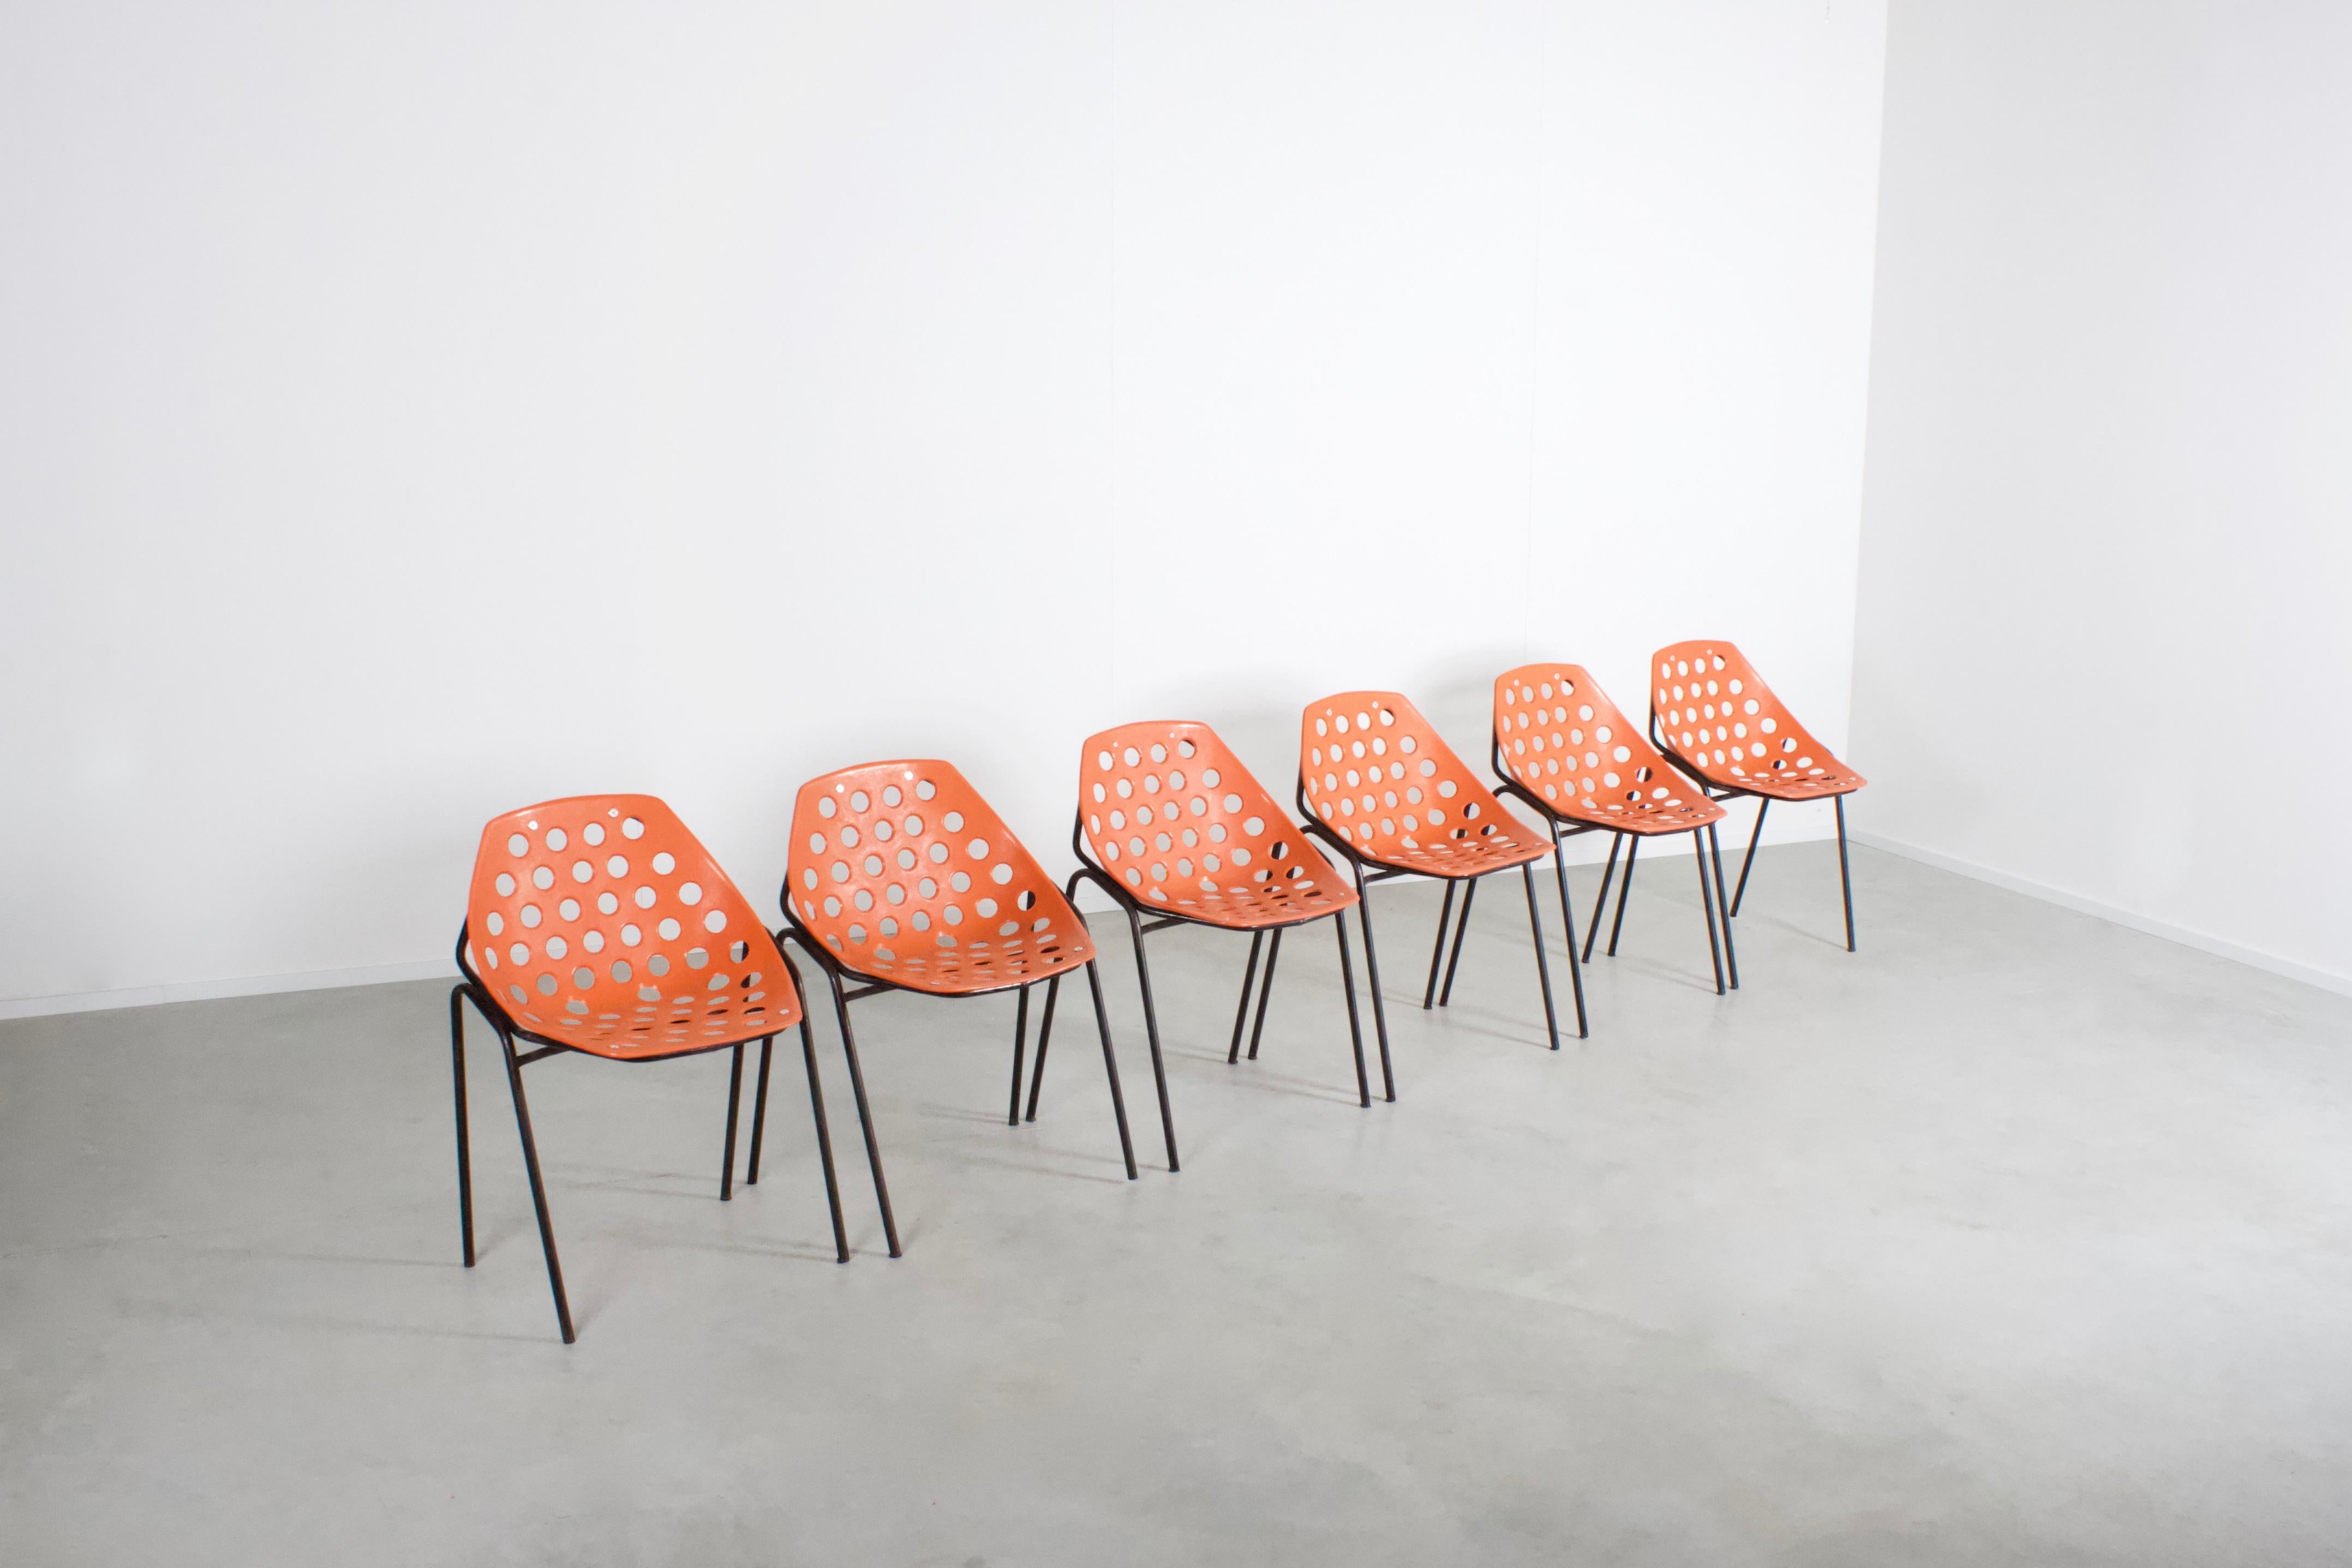 Set of six ‘Coquillage’ chairs in good original condition.

Manufactured by Meurop.

Designed by Pierre Guariche in the 1960s.

Pierre Guariche was known for created simplistic affordable Industrial furniture.

The shells of these chairs are made of